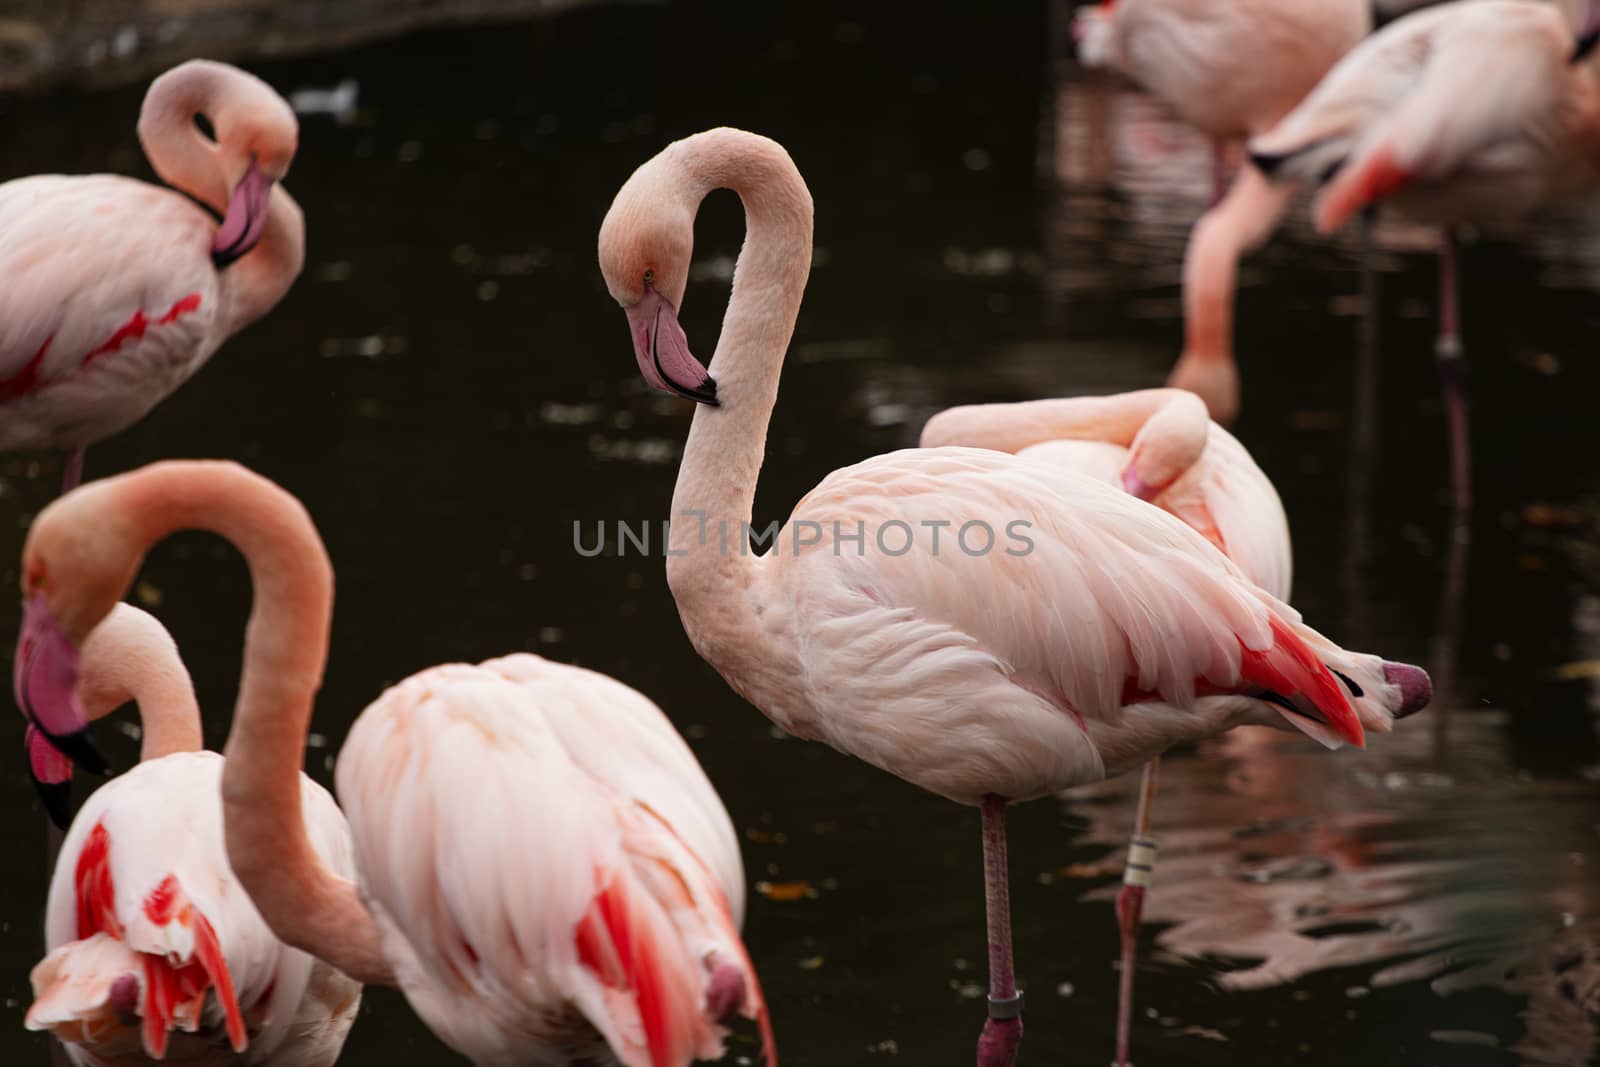 pink flamingo at a water front cleaning an chattering